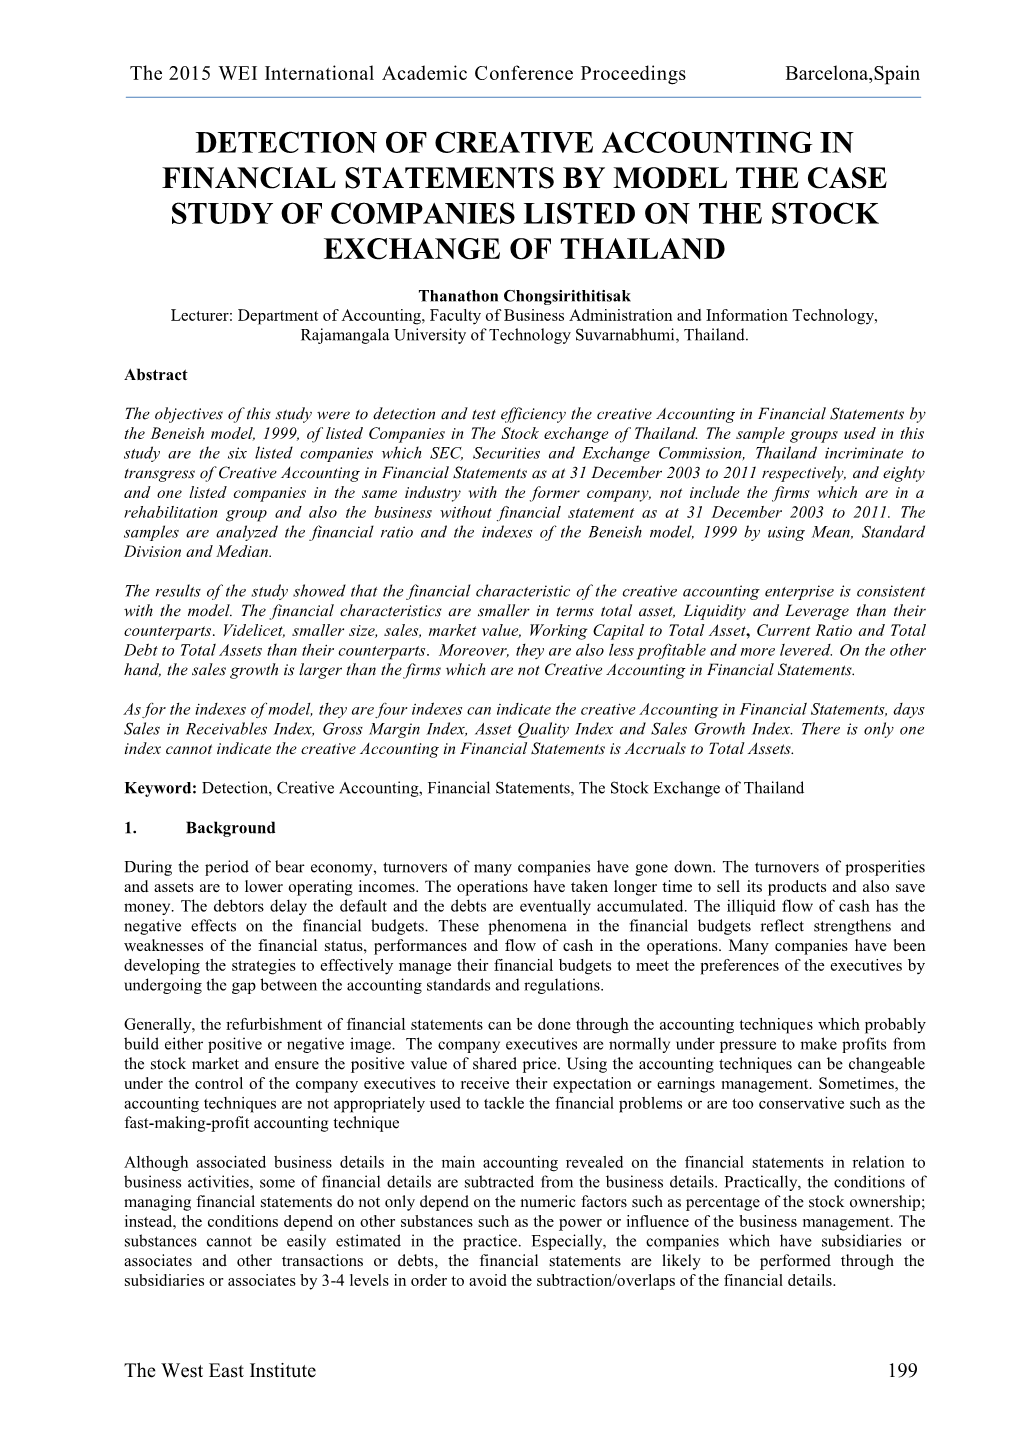 Detection of Creative Accounting in Financial Statements by Model the Case Study of Companies Listed on the Stock Exchange of Thailand